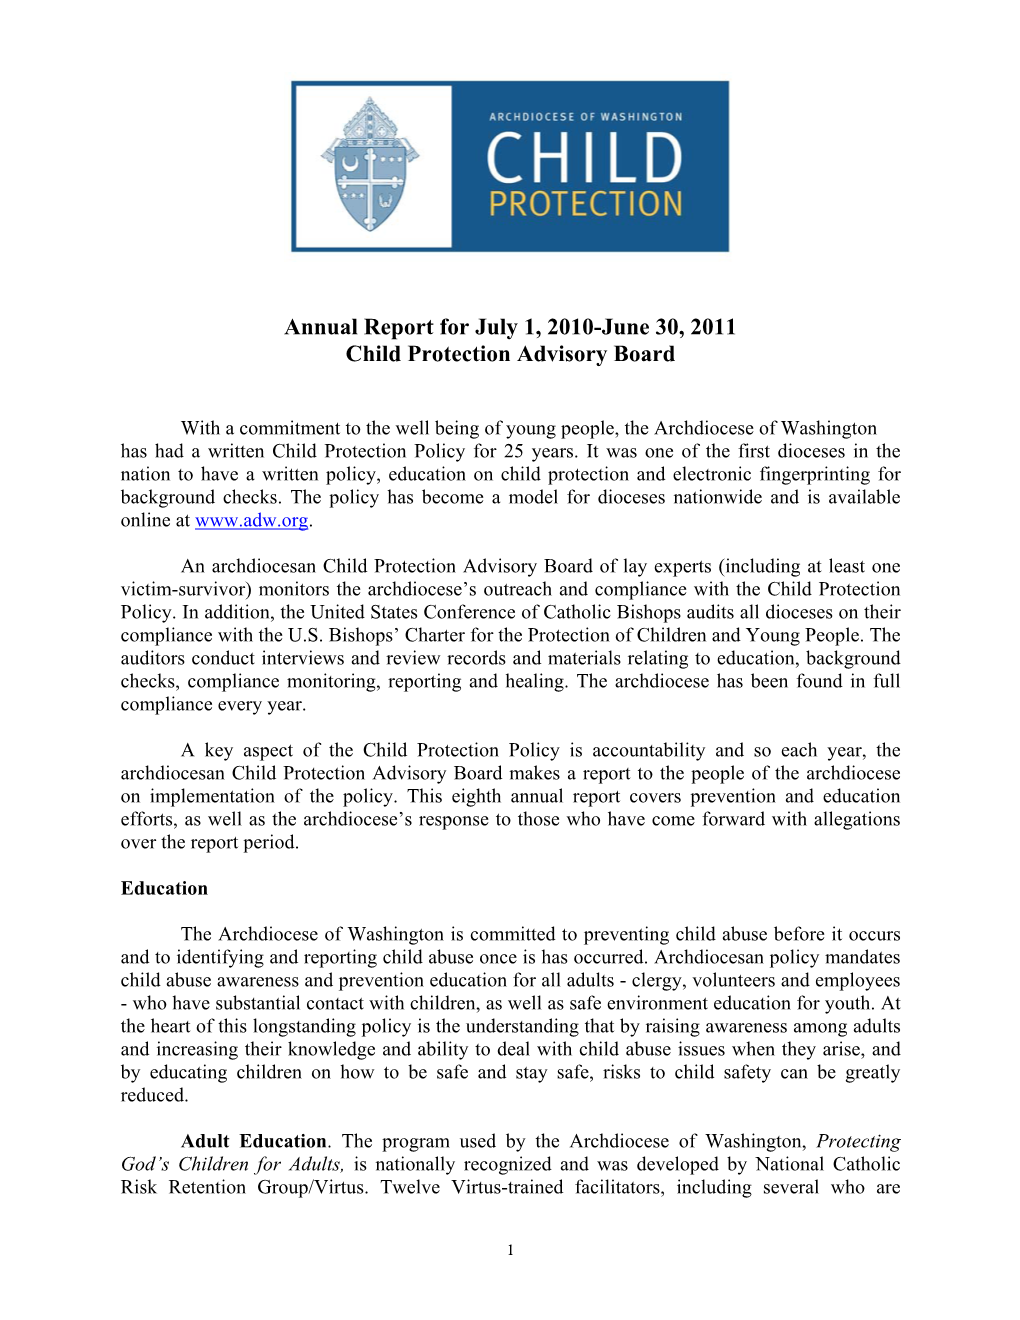 Annual Report for July 1, 2010-June 30, 2011 Child Protection Advisory Board